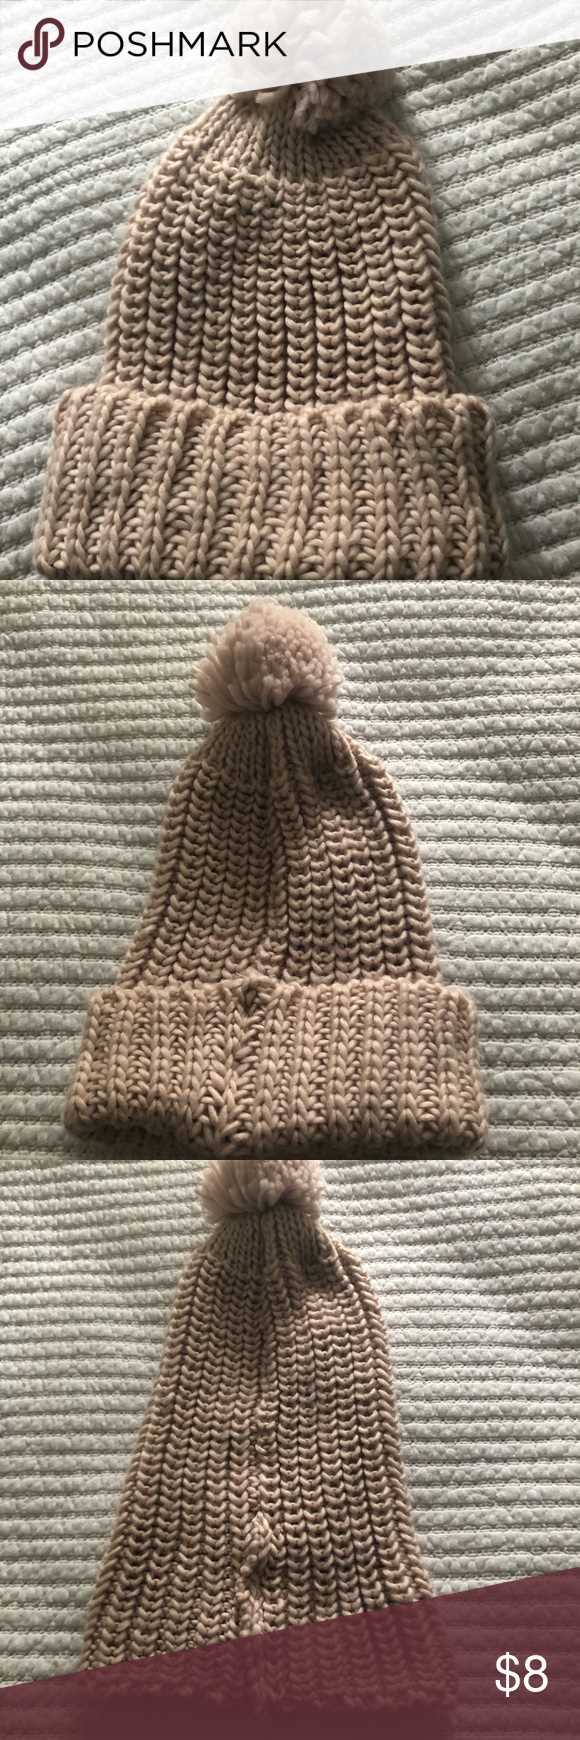 Knitting a Toboggan: Step-by-Step Guide and Tips